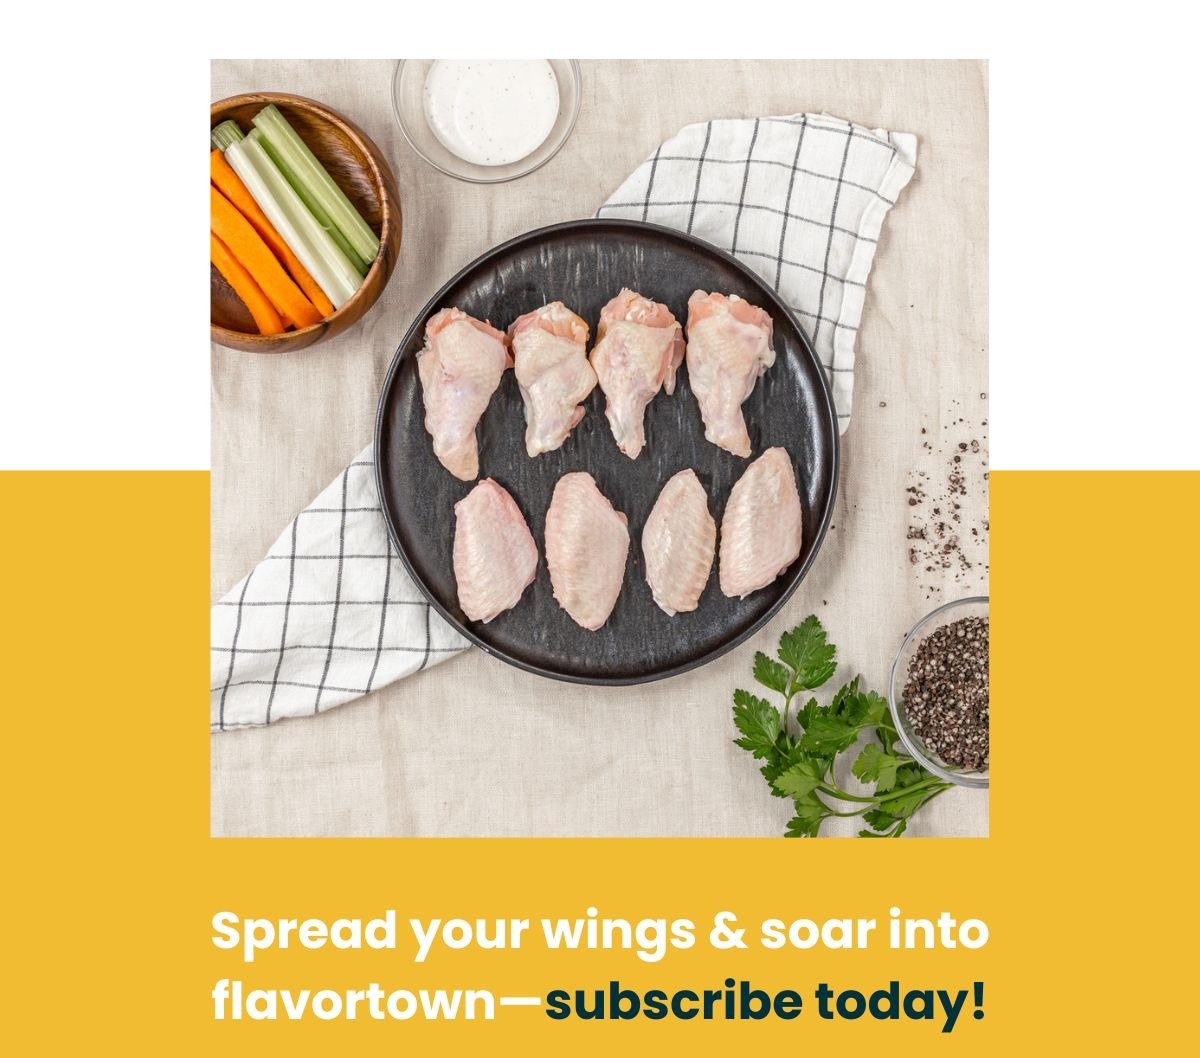 Free jumbo wings for a year! Subscribe today!